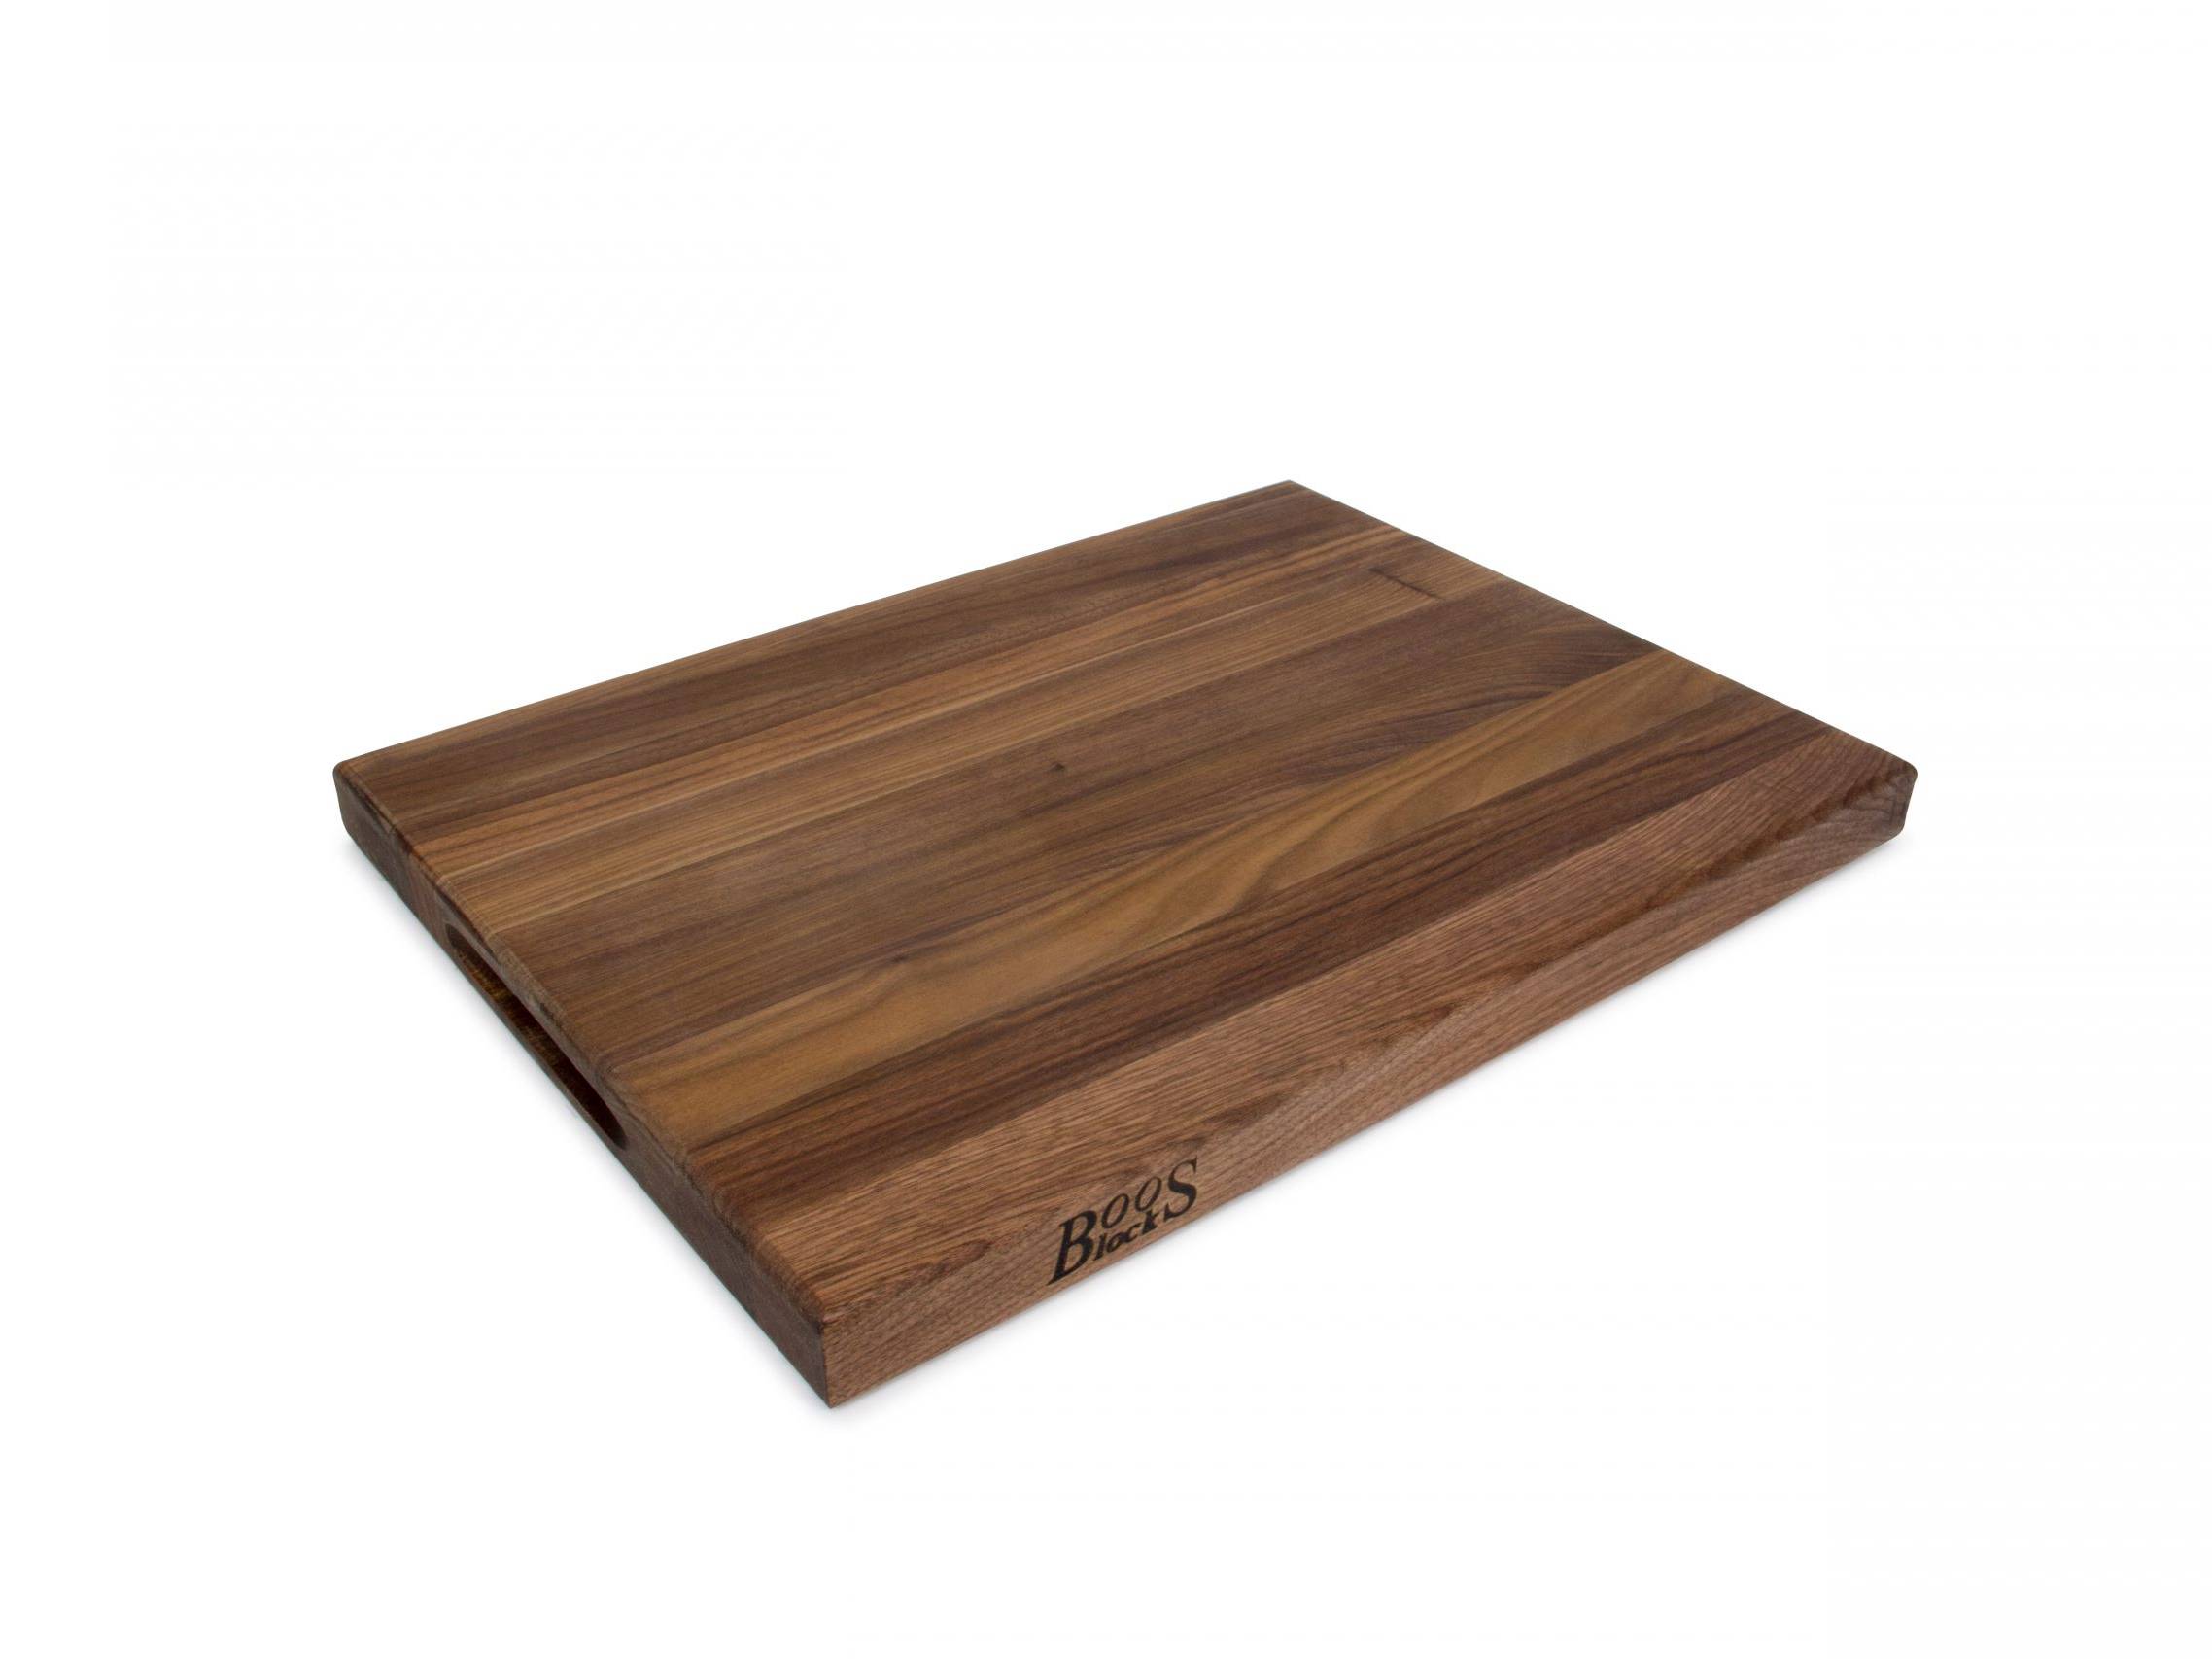 Pro Chef Black Walnut chopping board with recessed grip; can be used on both sides 13